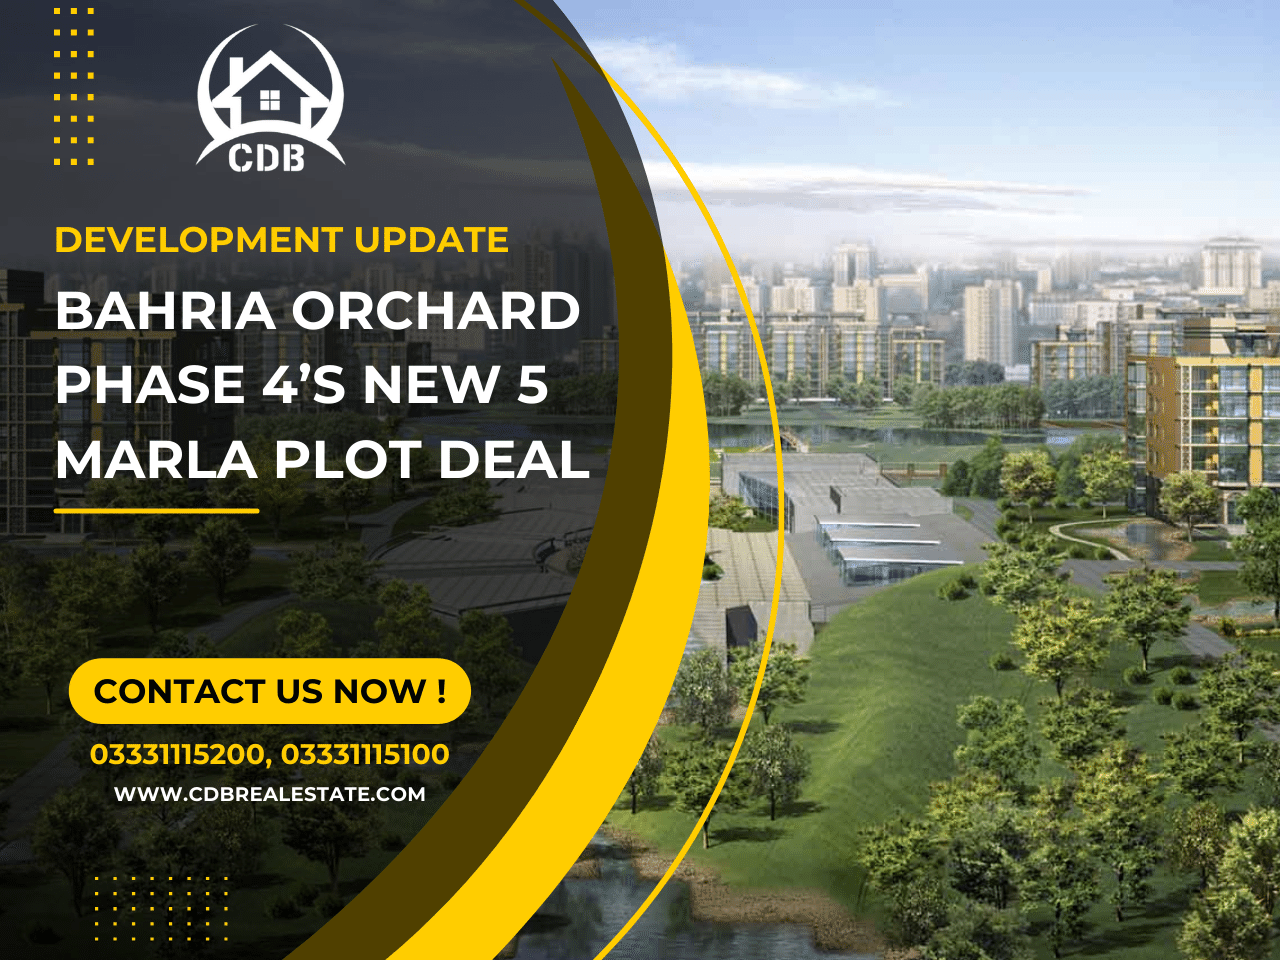 Development Update: Bahria Orchard Phase 4's New 5 Marla Plot Deal